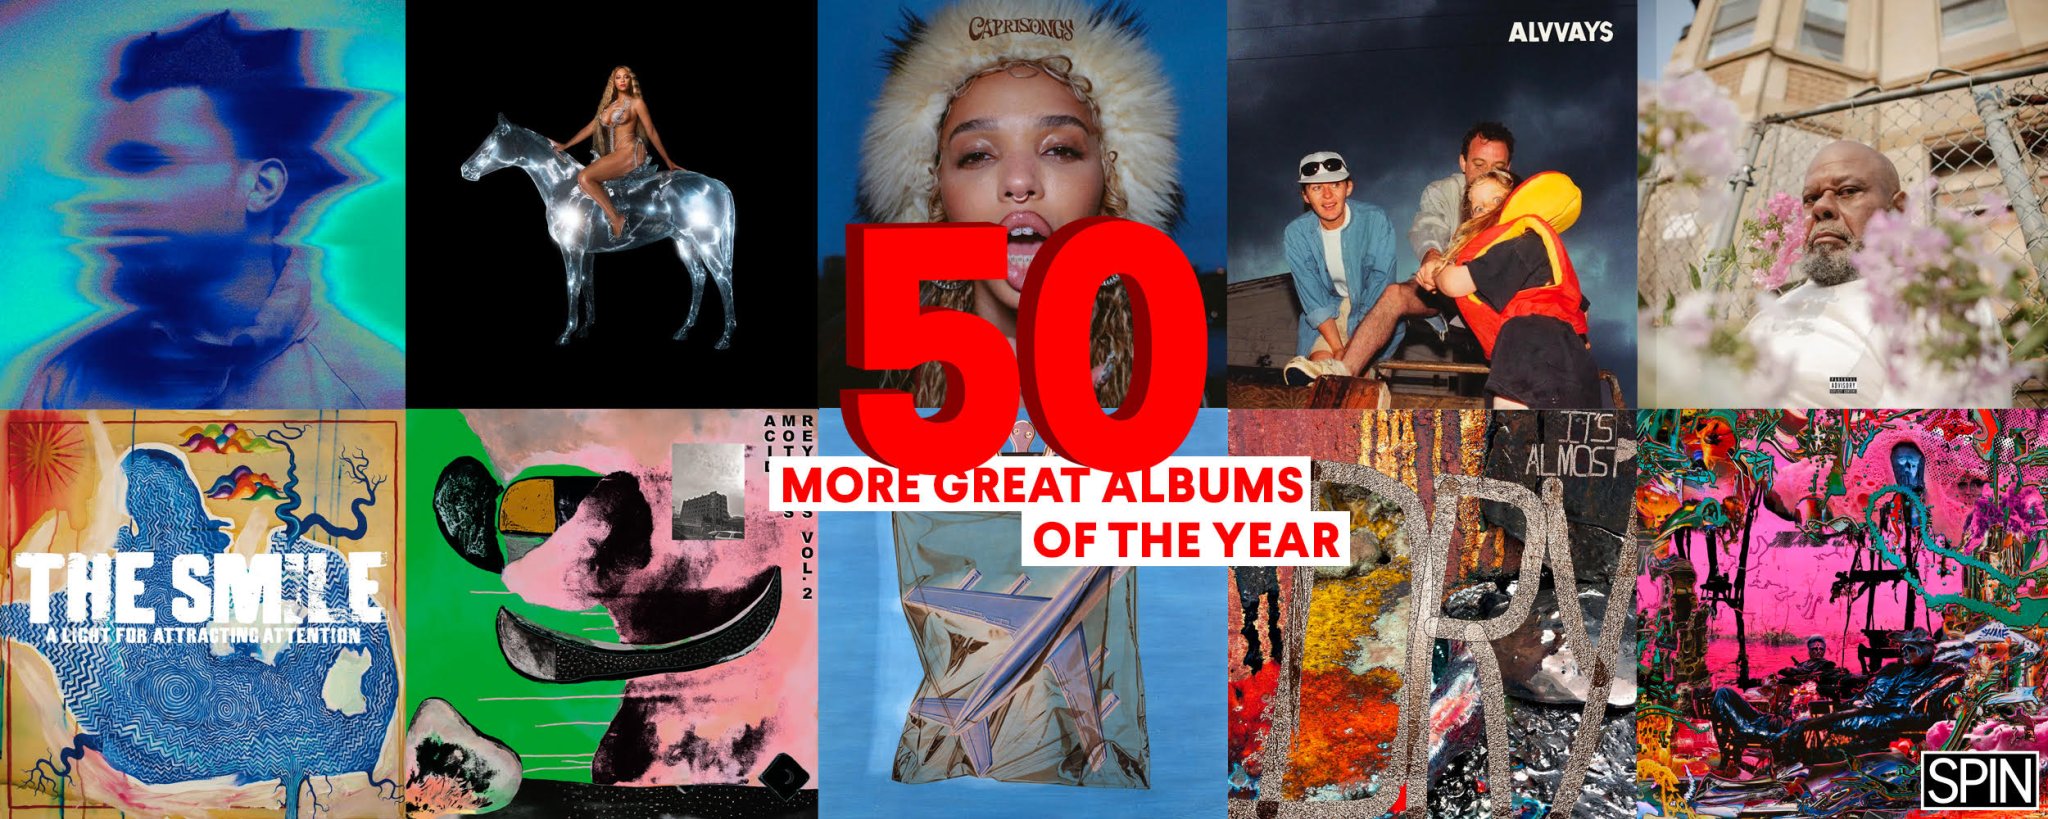 50 More Great Albums of the Year - SPIN